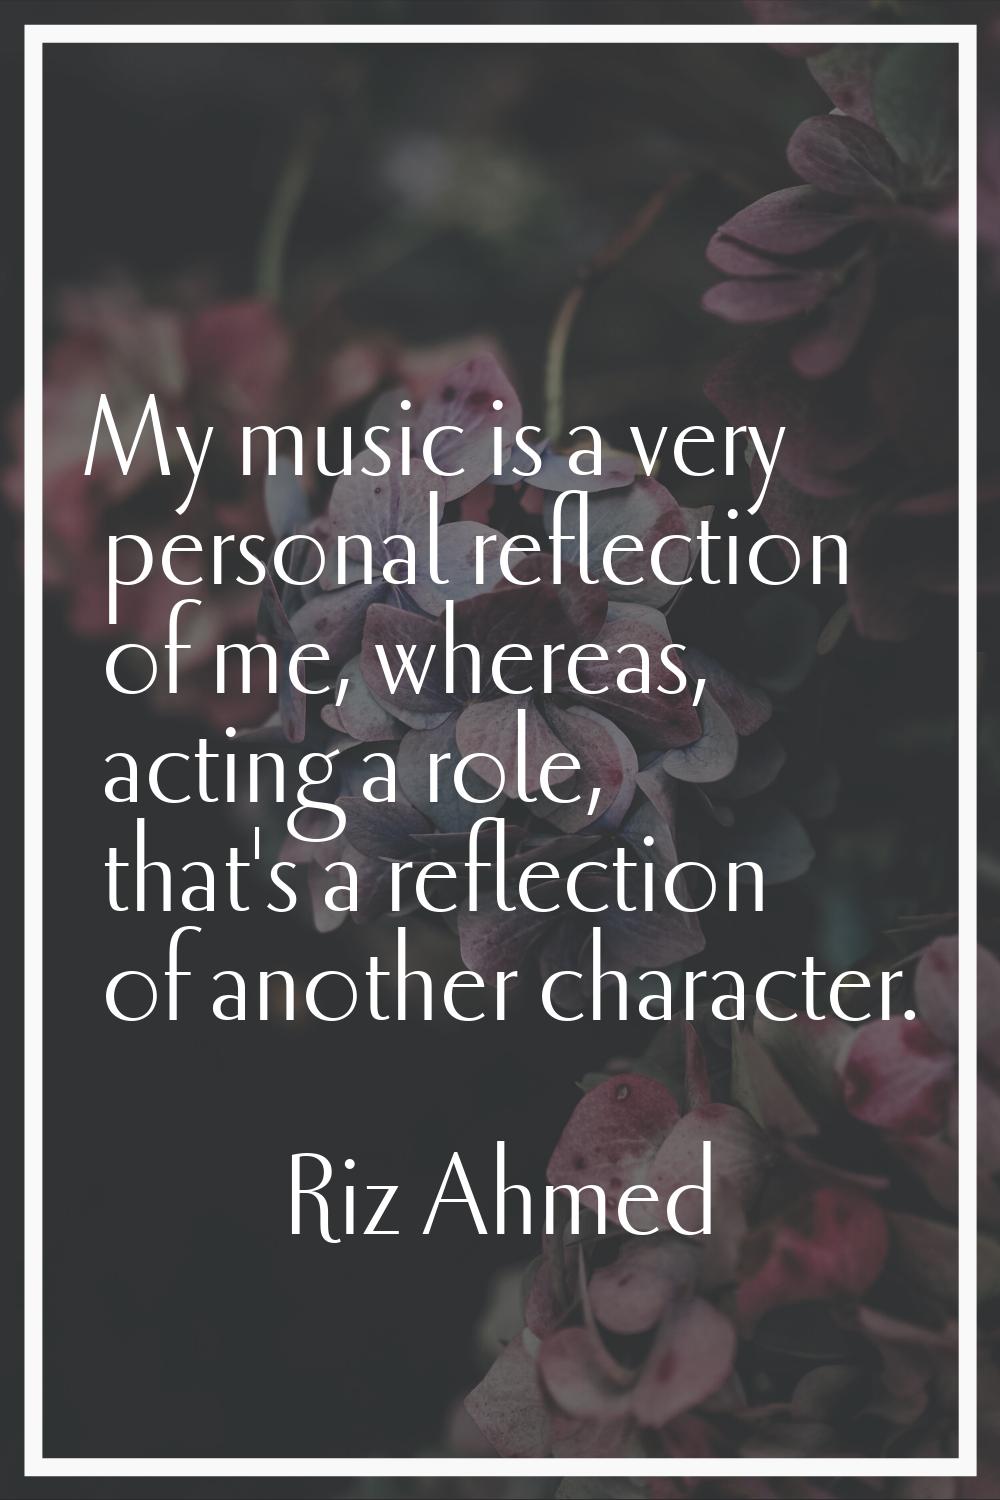 My music is a very personal reflection of me, whereas, acting a role, that's a reflection of anothe